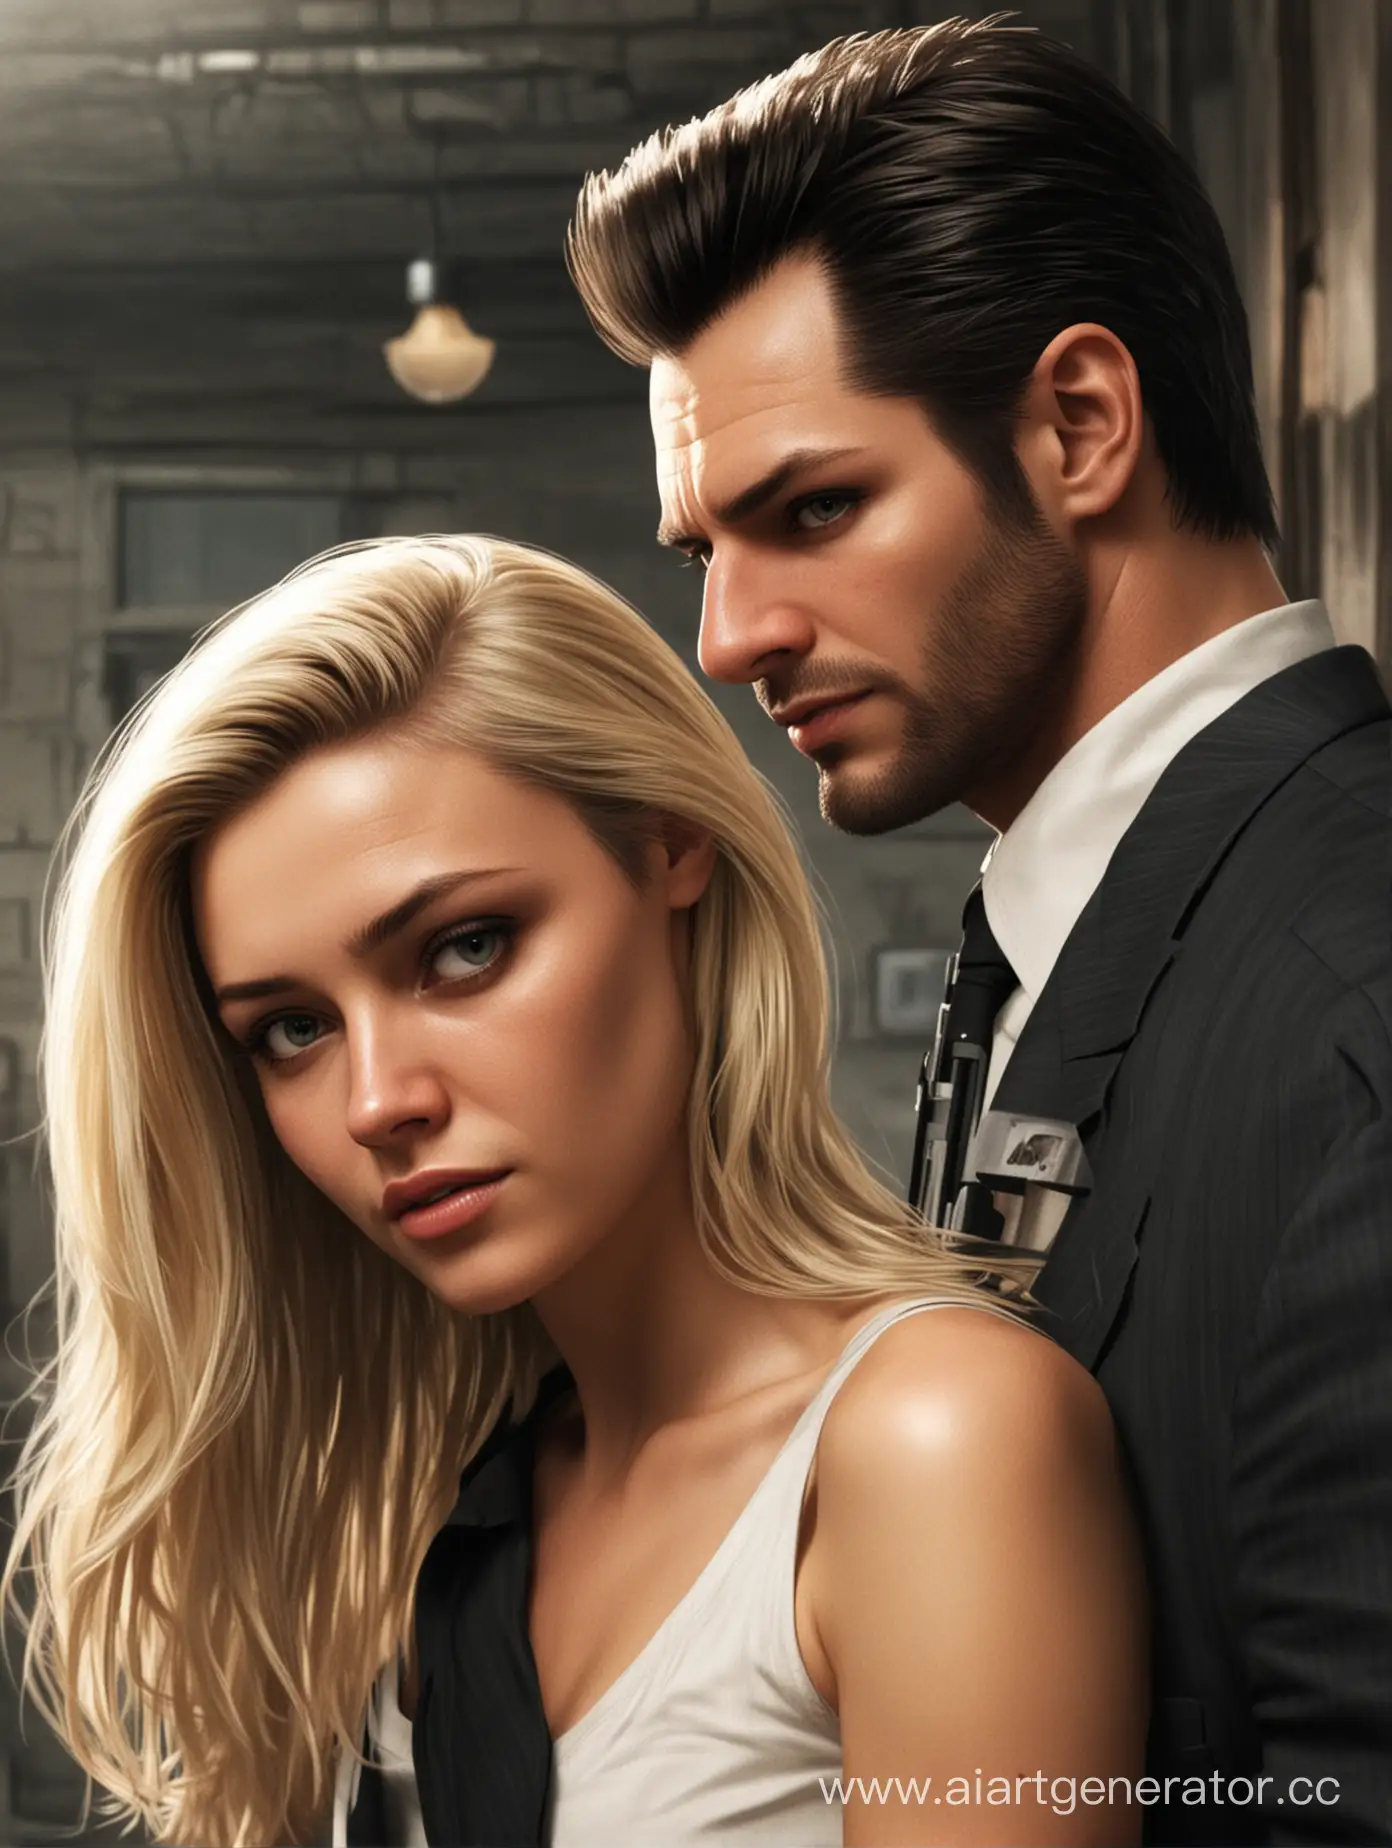 Max-Payne-Protects-a-Beautiful-Blonde-Woman